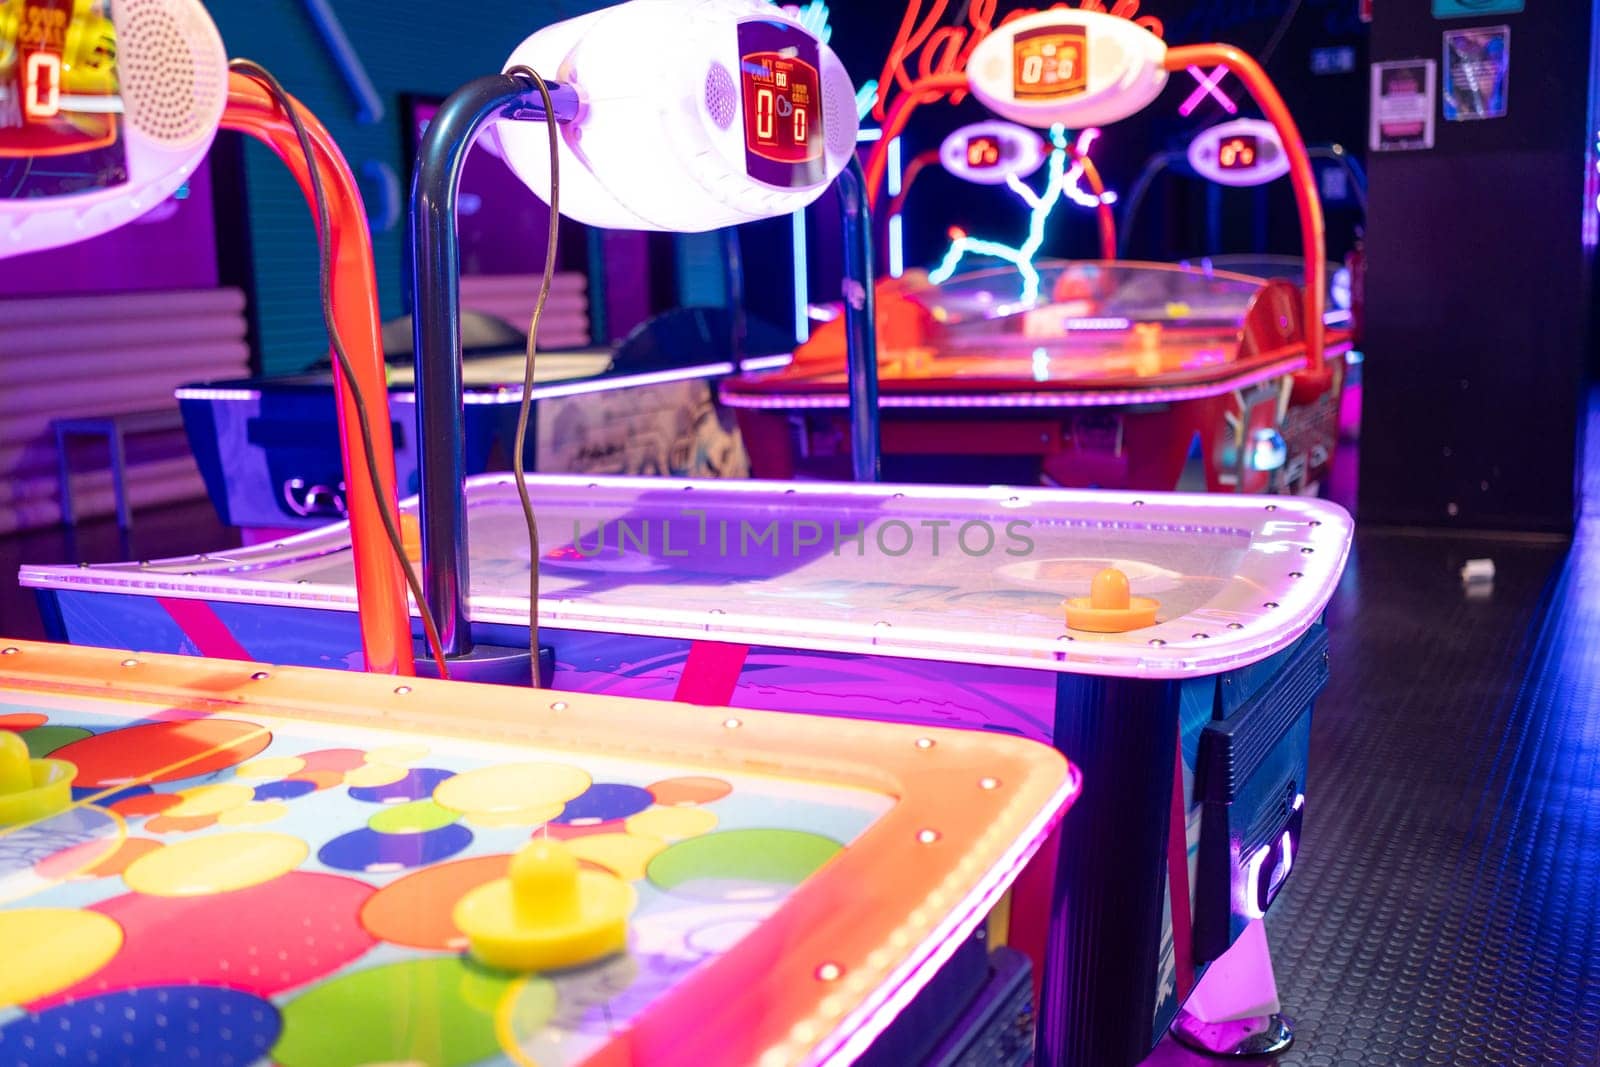 Neon Illuminated air hockey tables in gaming arcade at night by andreonegin